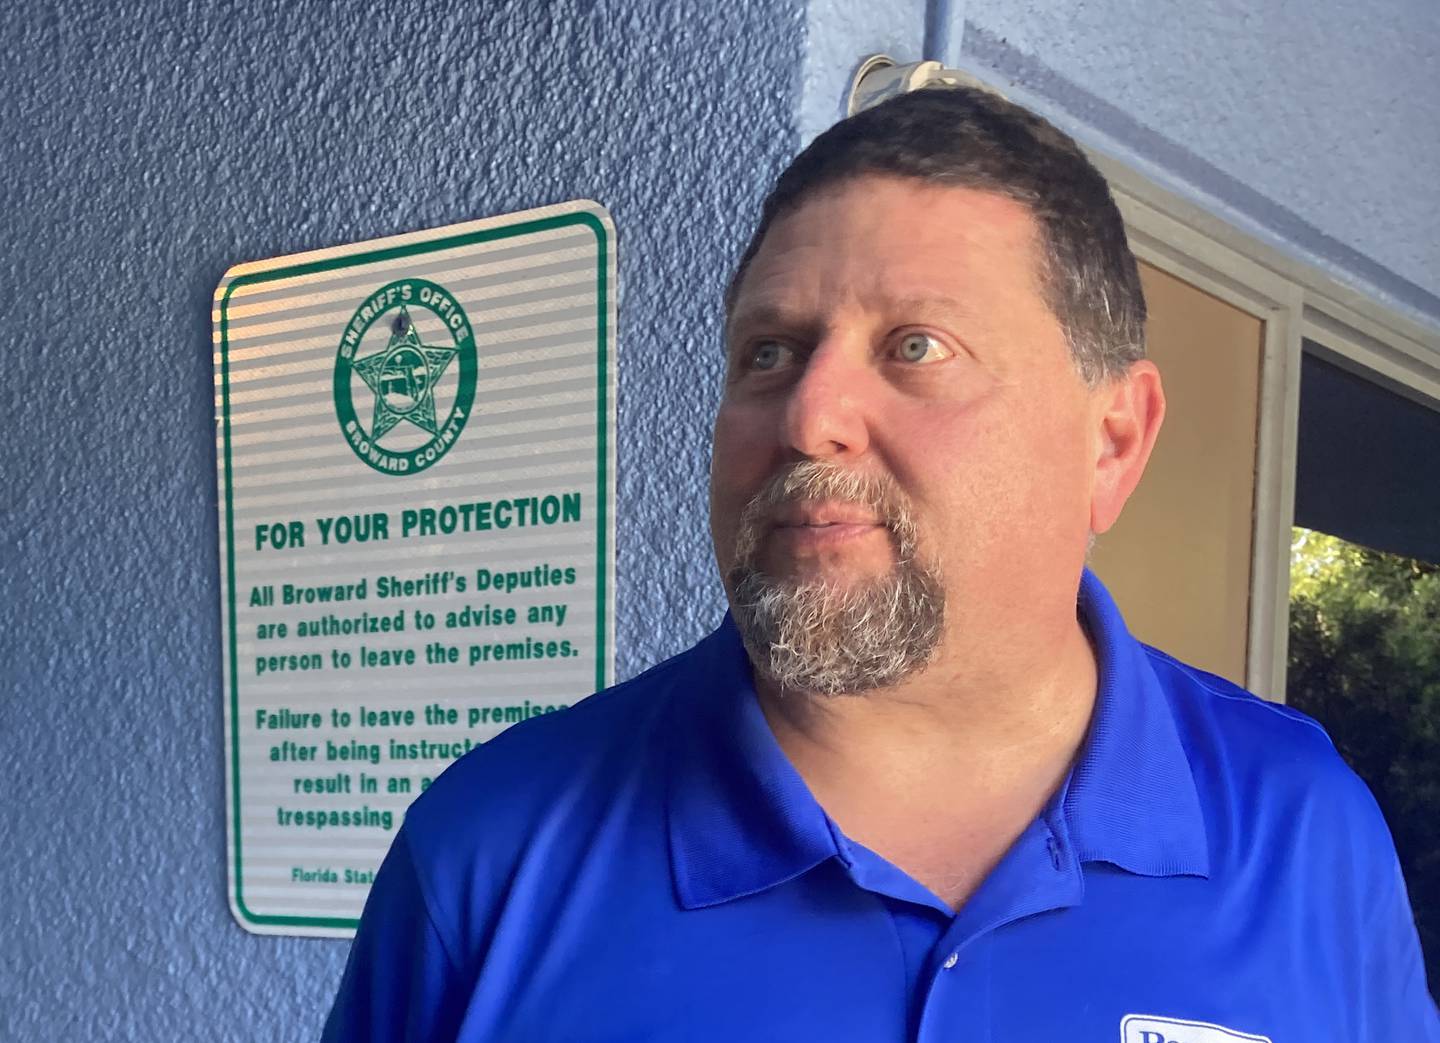 Izzy Fintz, manager of the Quality Inn & Suites of Hollywood, said he takes human trafficking seriously but can’t control what guests do in the privacy of their rooms. 